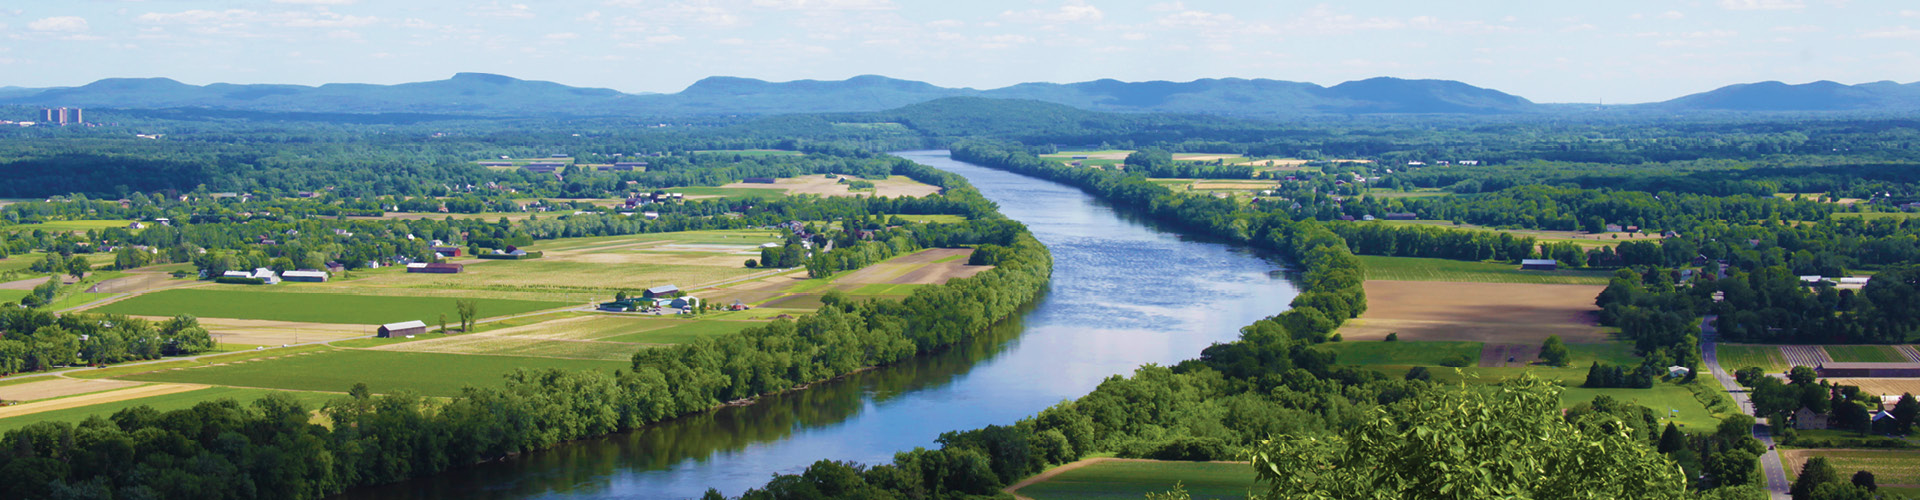 View of the CT river